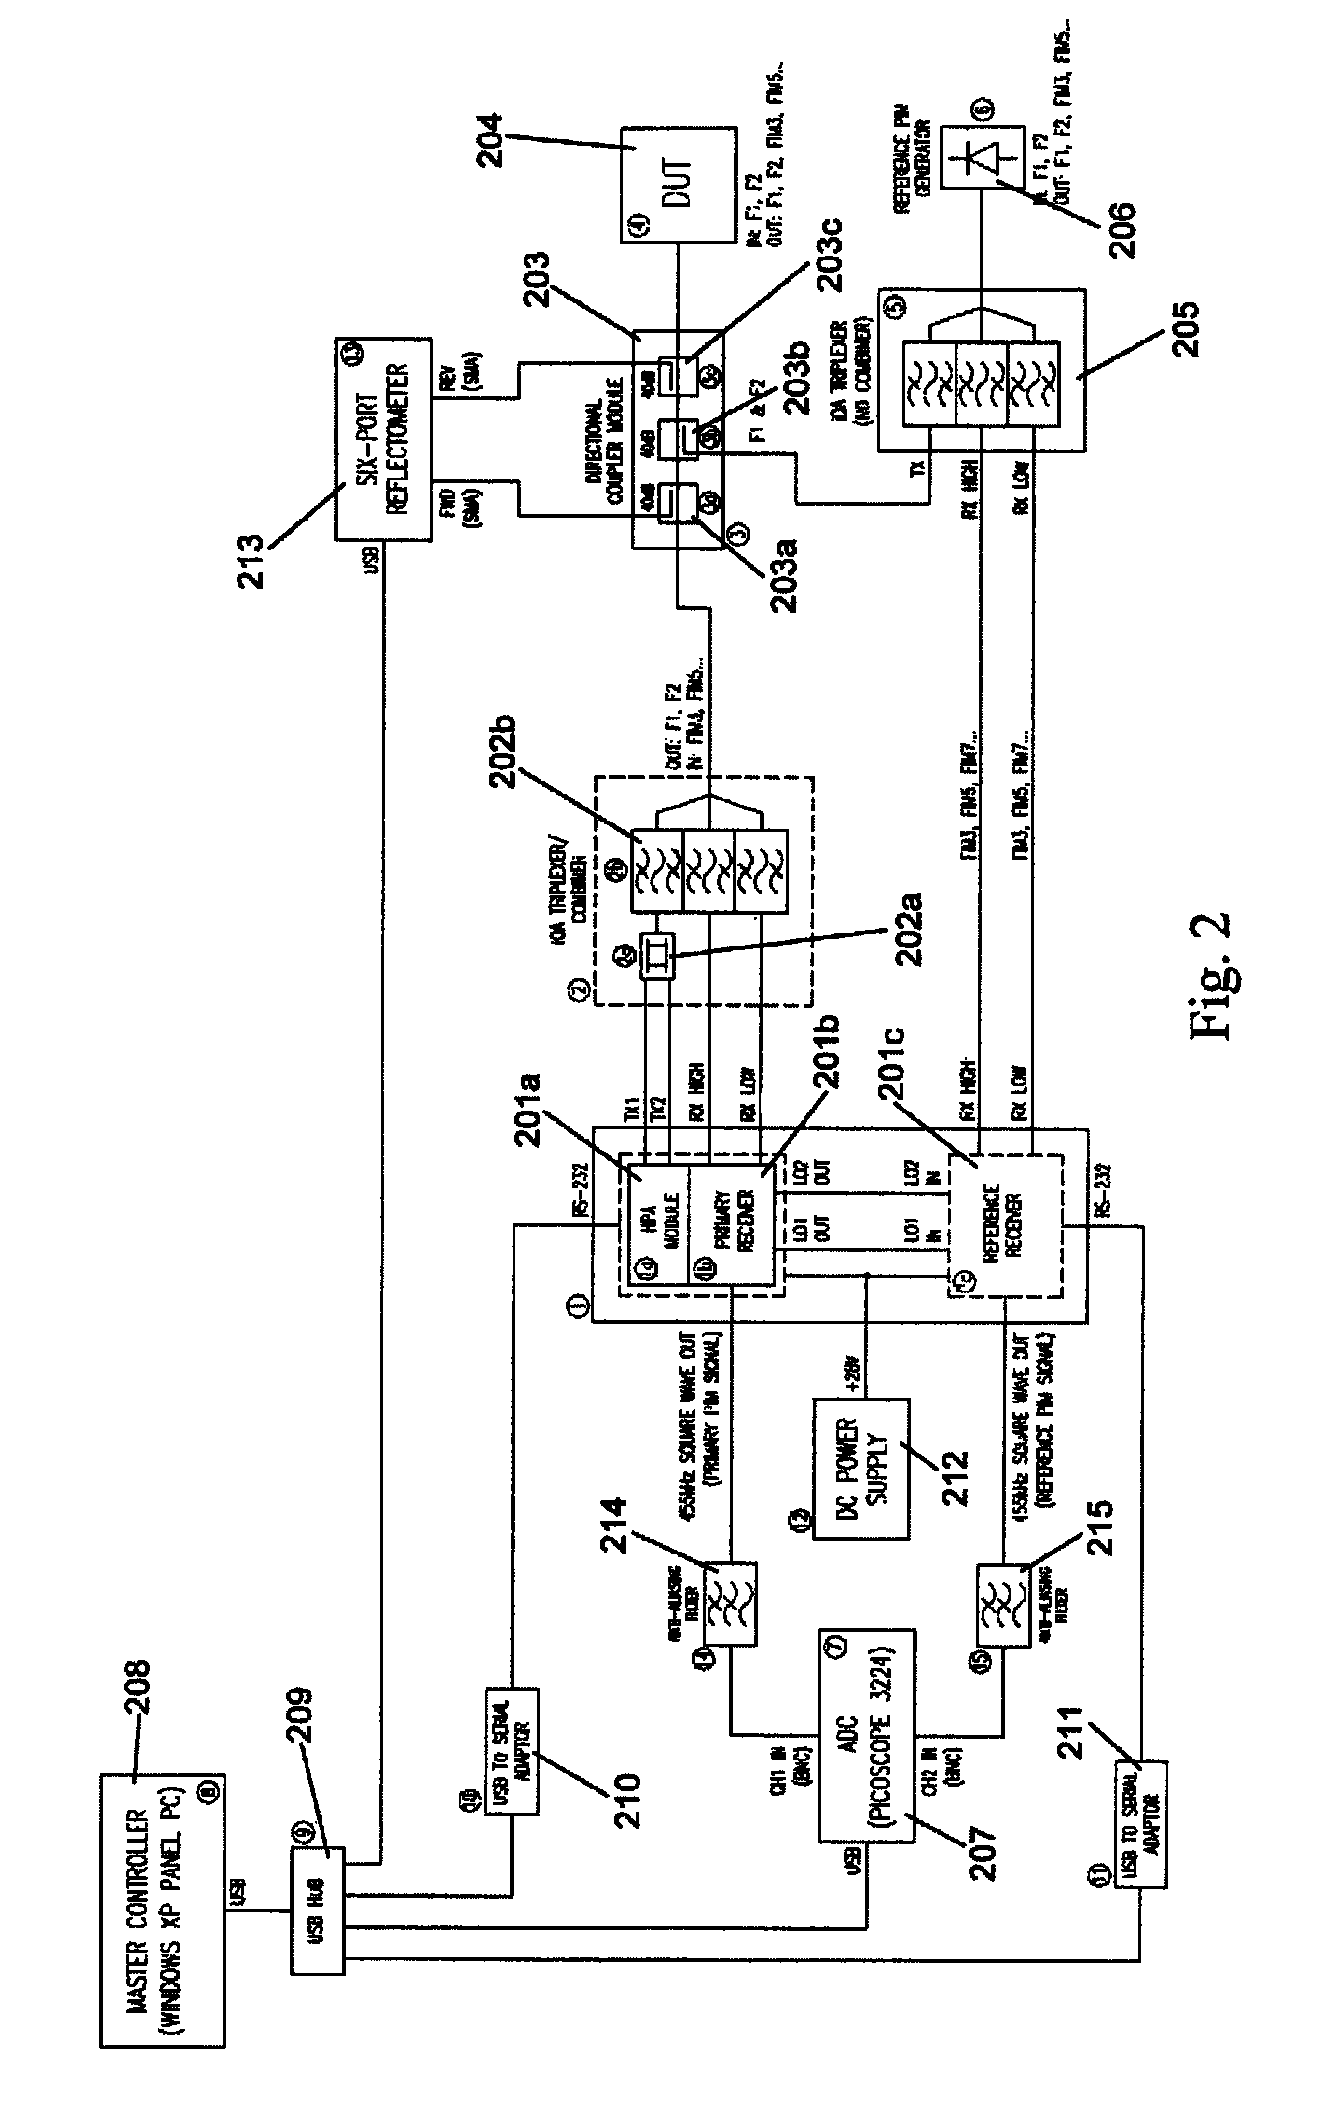 Method and apparatus for locating faults in communications networks